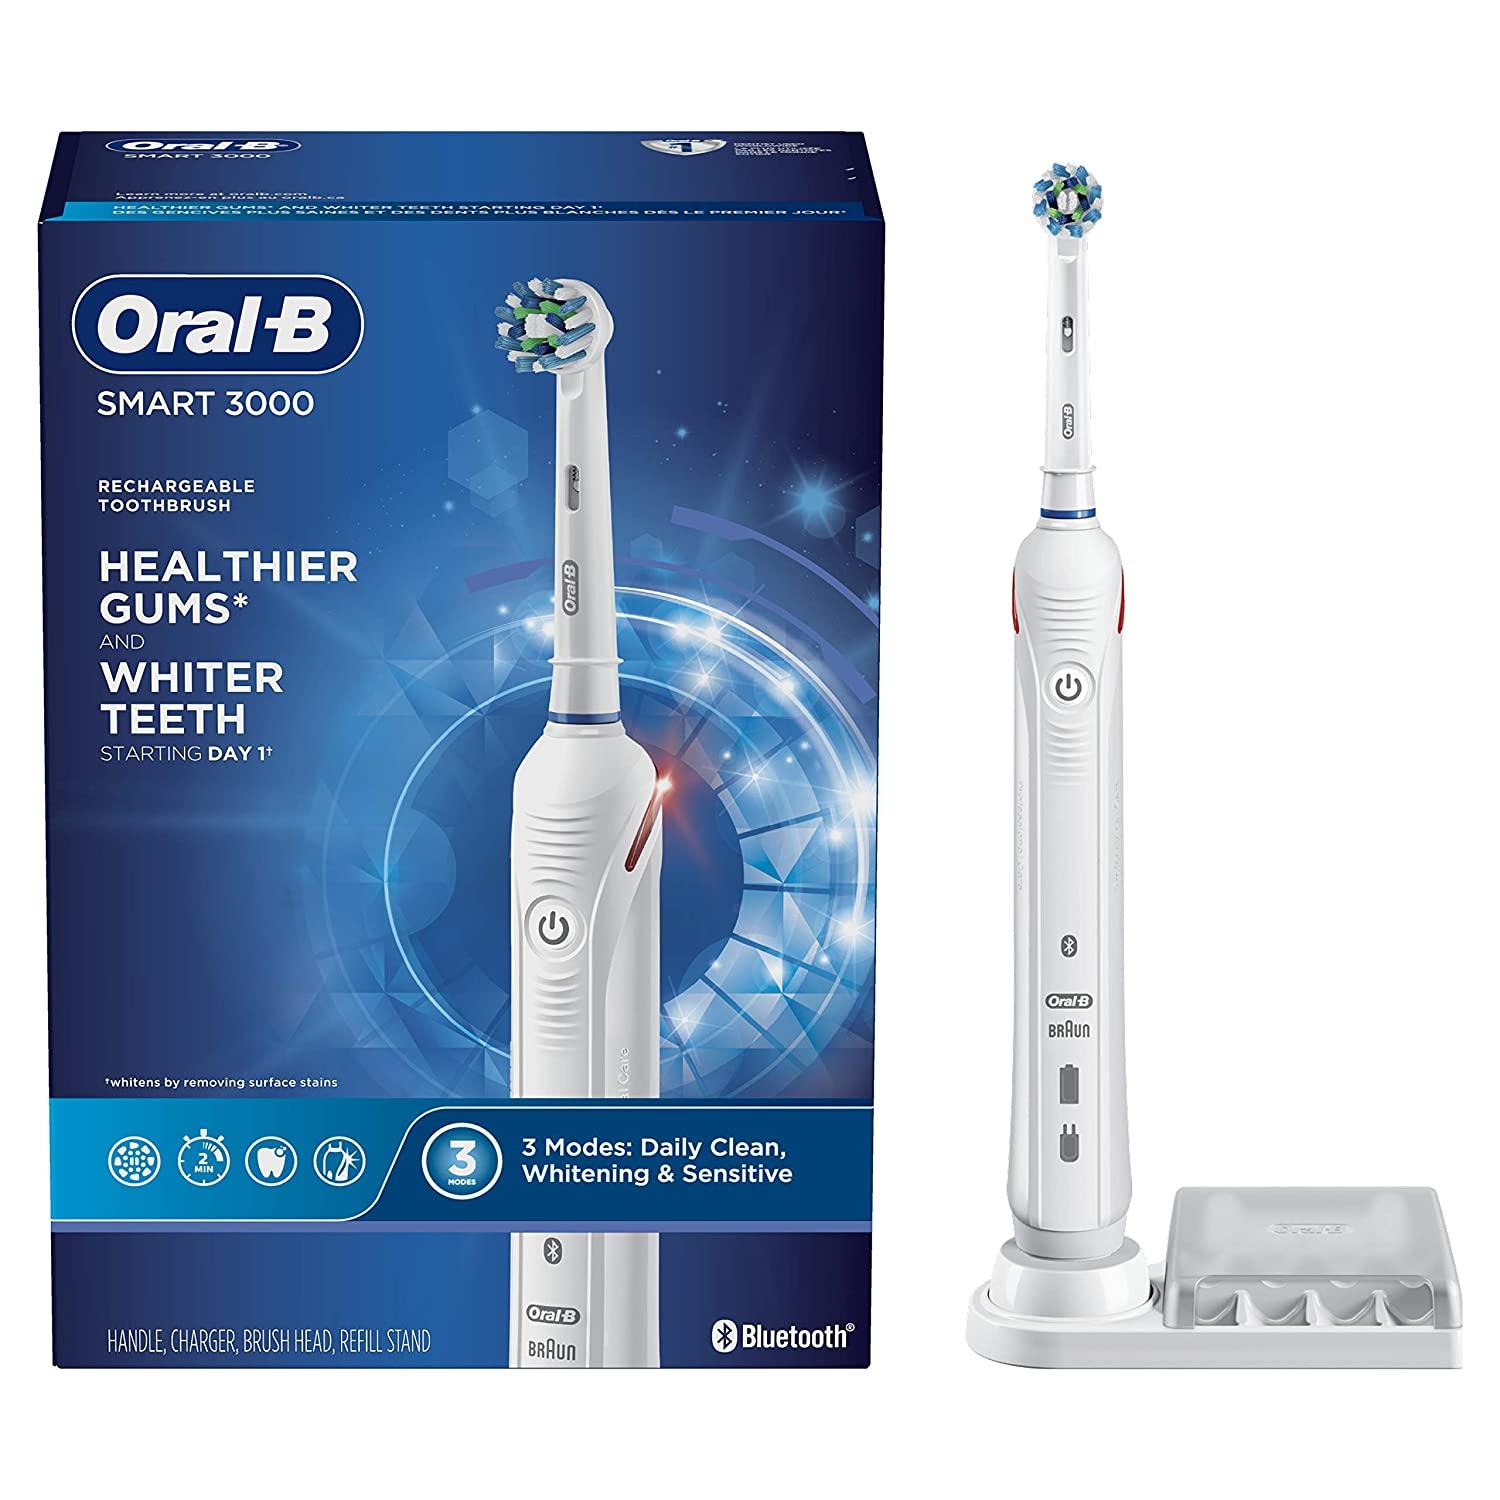 Oral B 3000 Gum Care Electric Toothbrush Deals